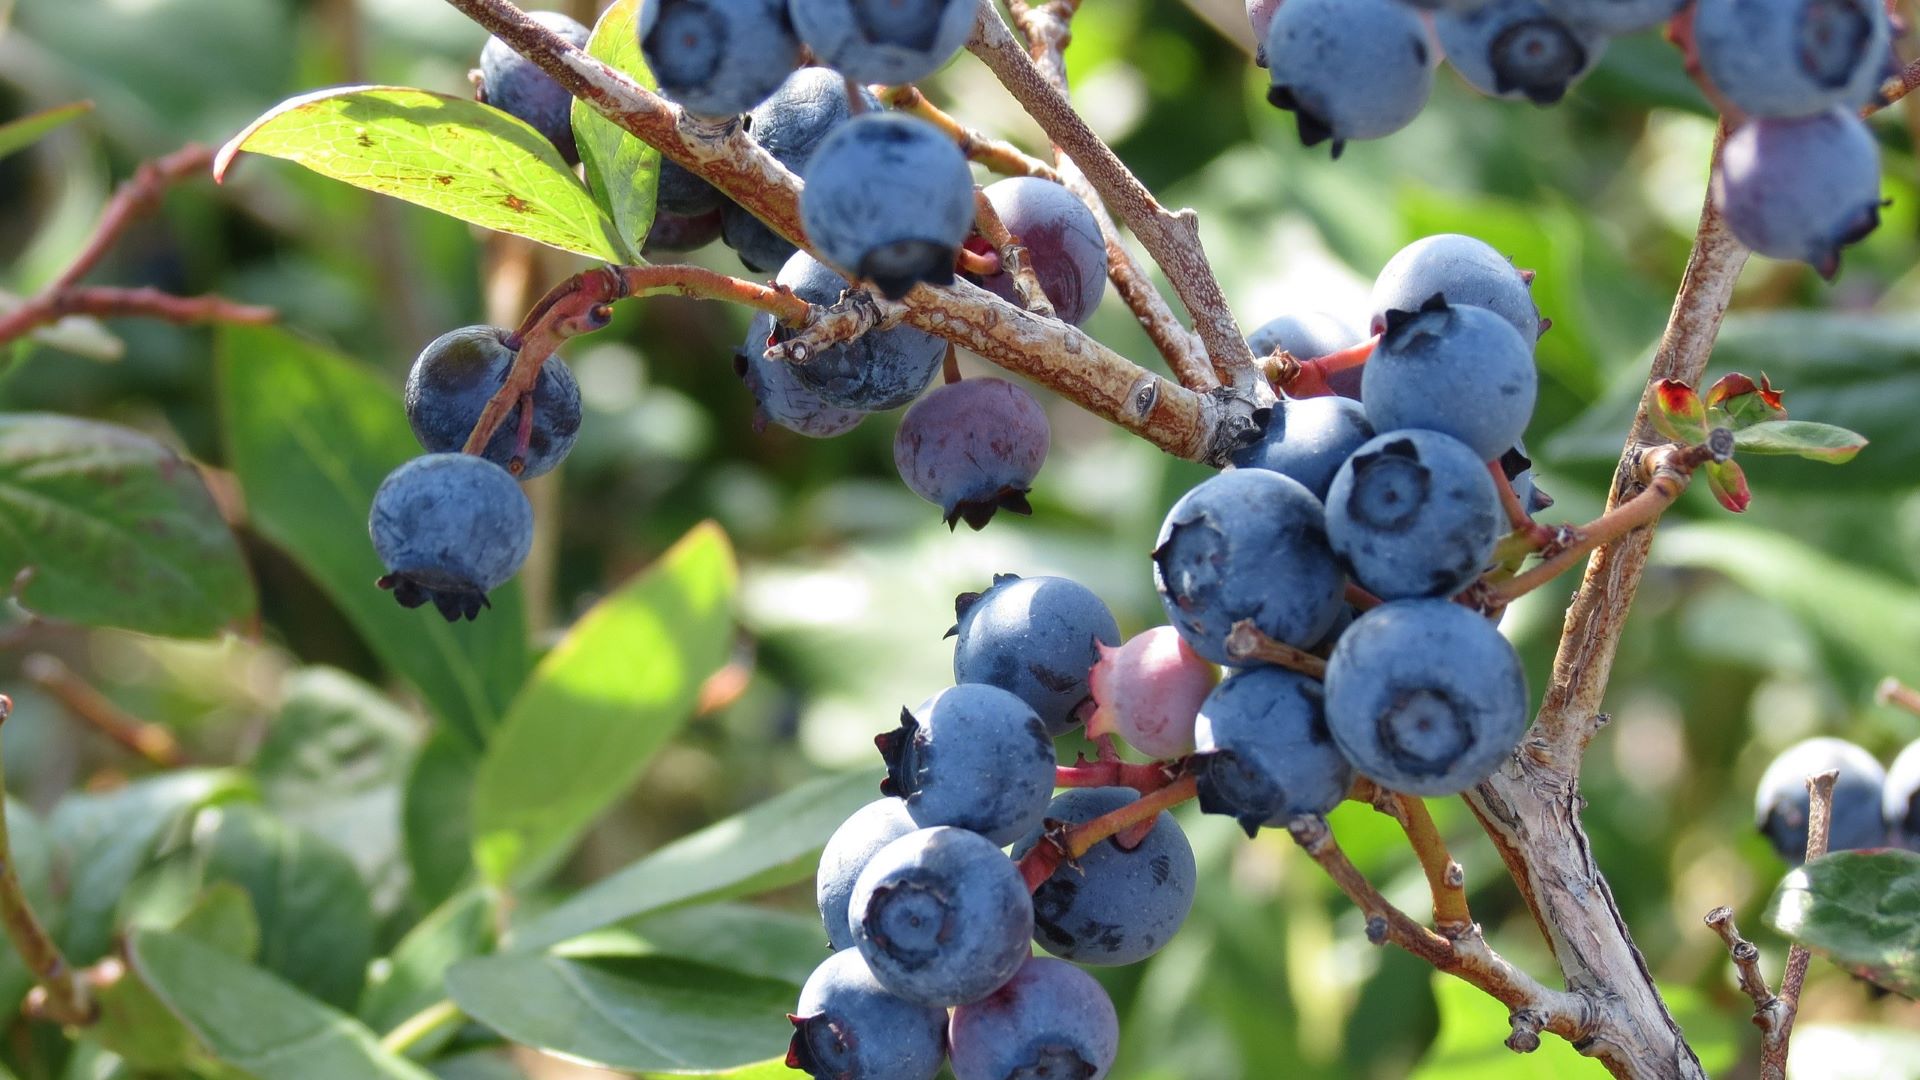 Wild blueberry harvest suffered in this year’s drought